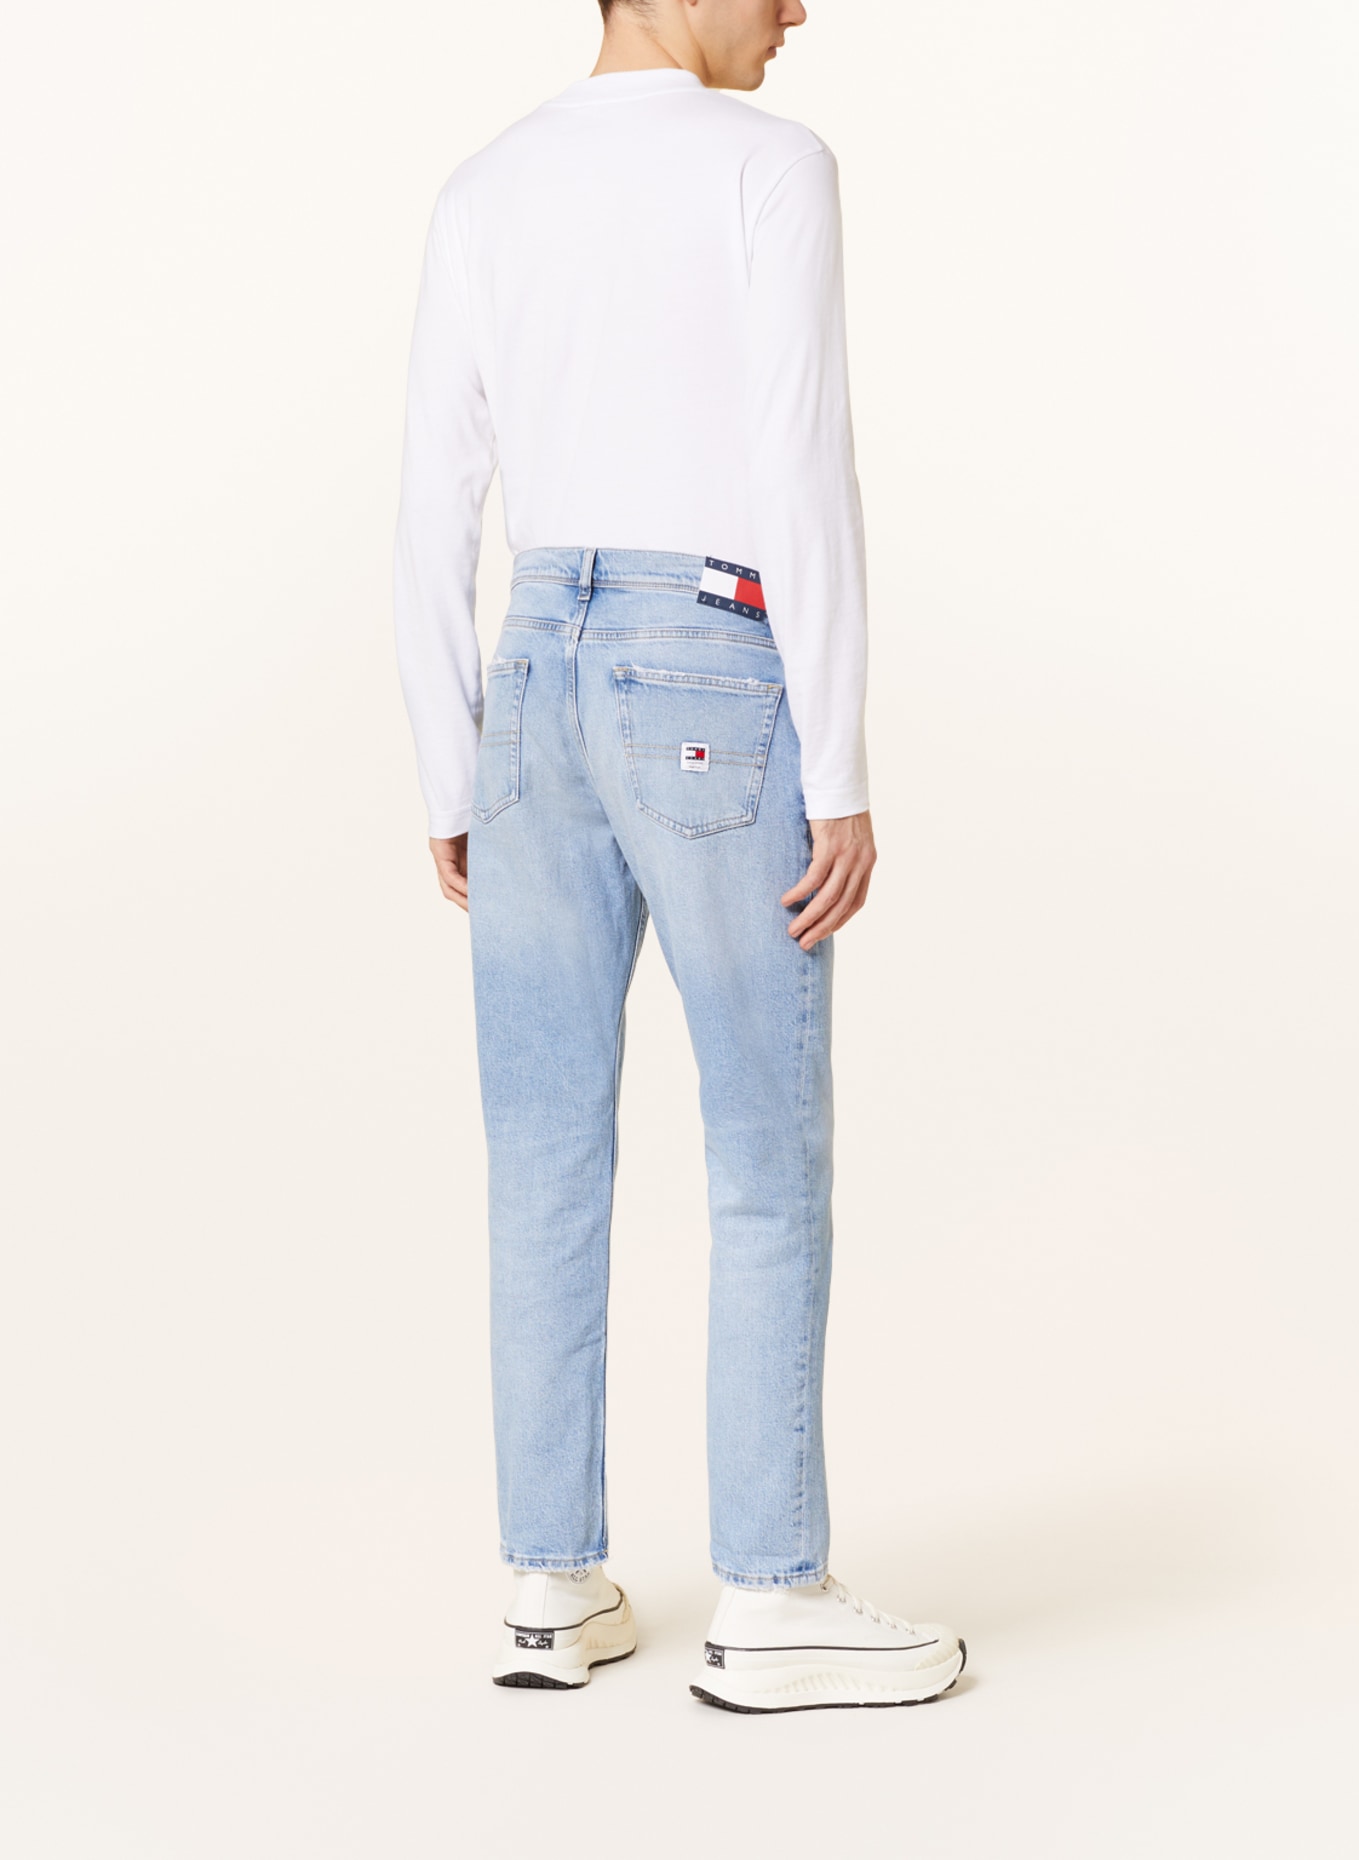 TOMMY JEANS Jeans ETHAN Straight Fit, Farbe: 1AB Denim Light (Bild 3)